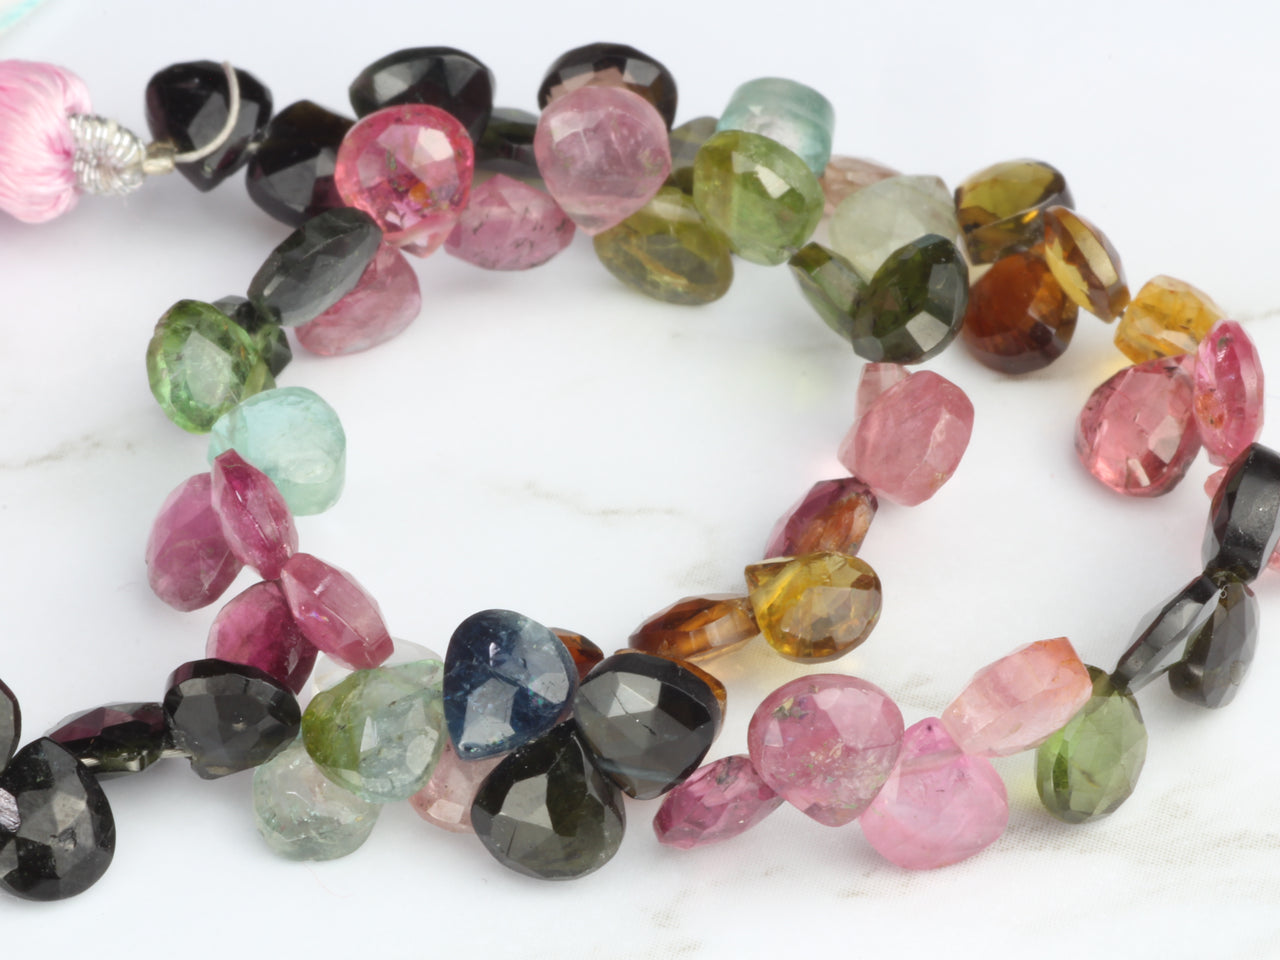 Watermelon Tourmaline 5mm Faceted Heart Shaped Briolettes